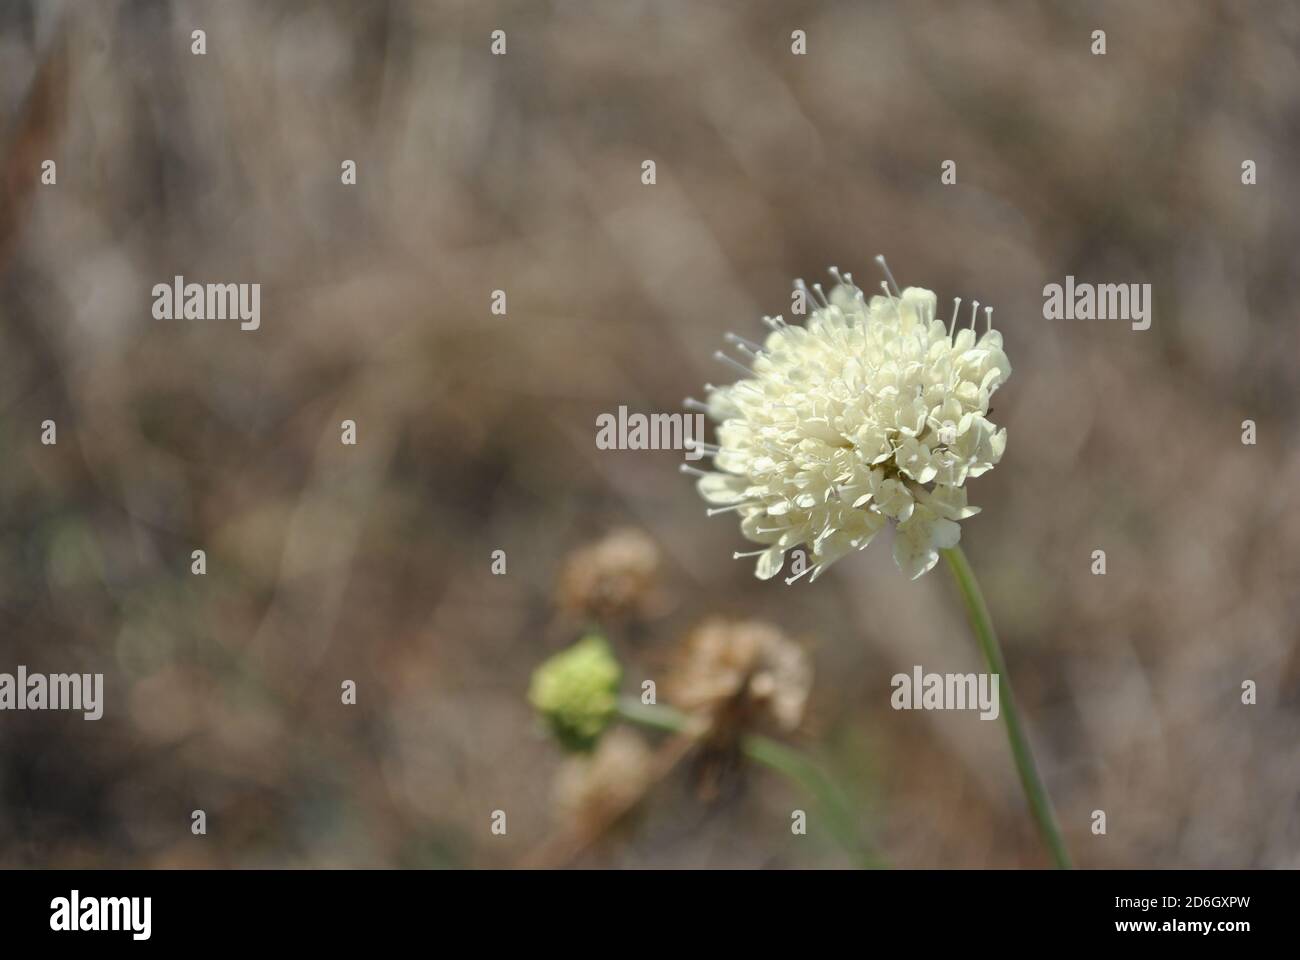 Cephalaria white flower blooming, close up macro detail on soft blurry gray background Stock Photo